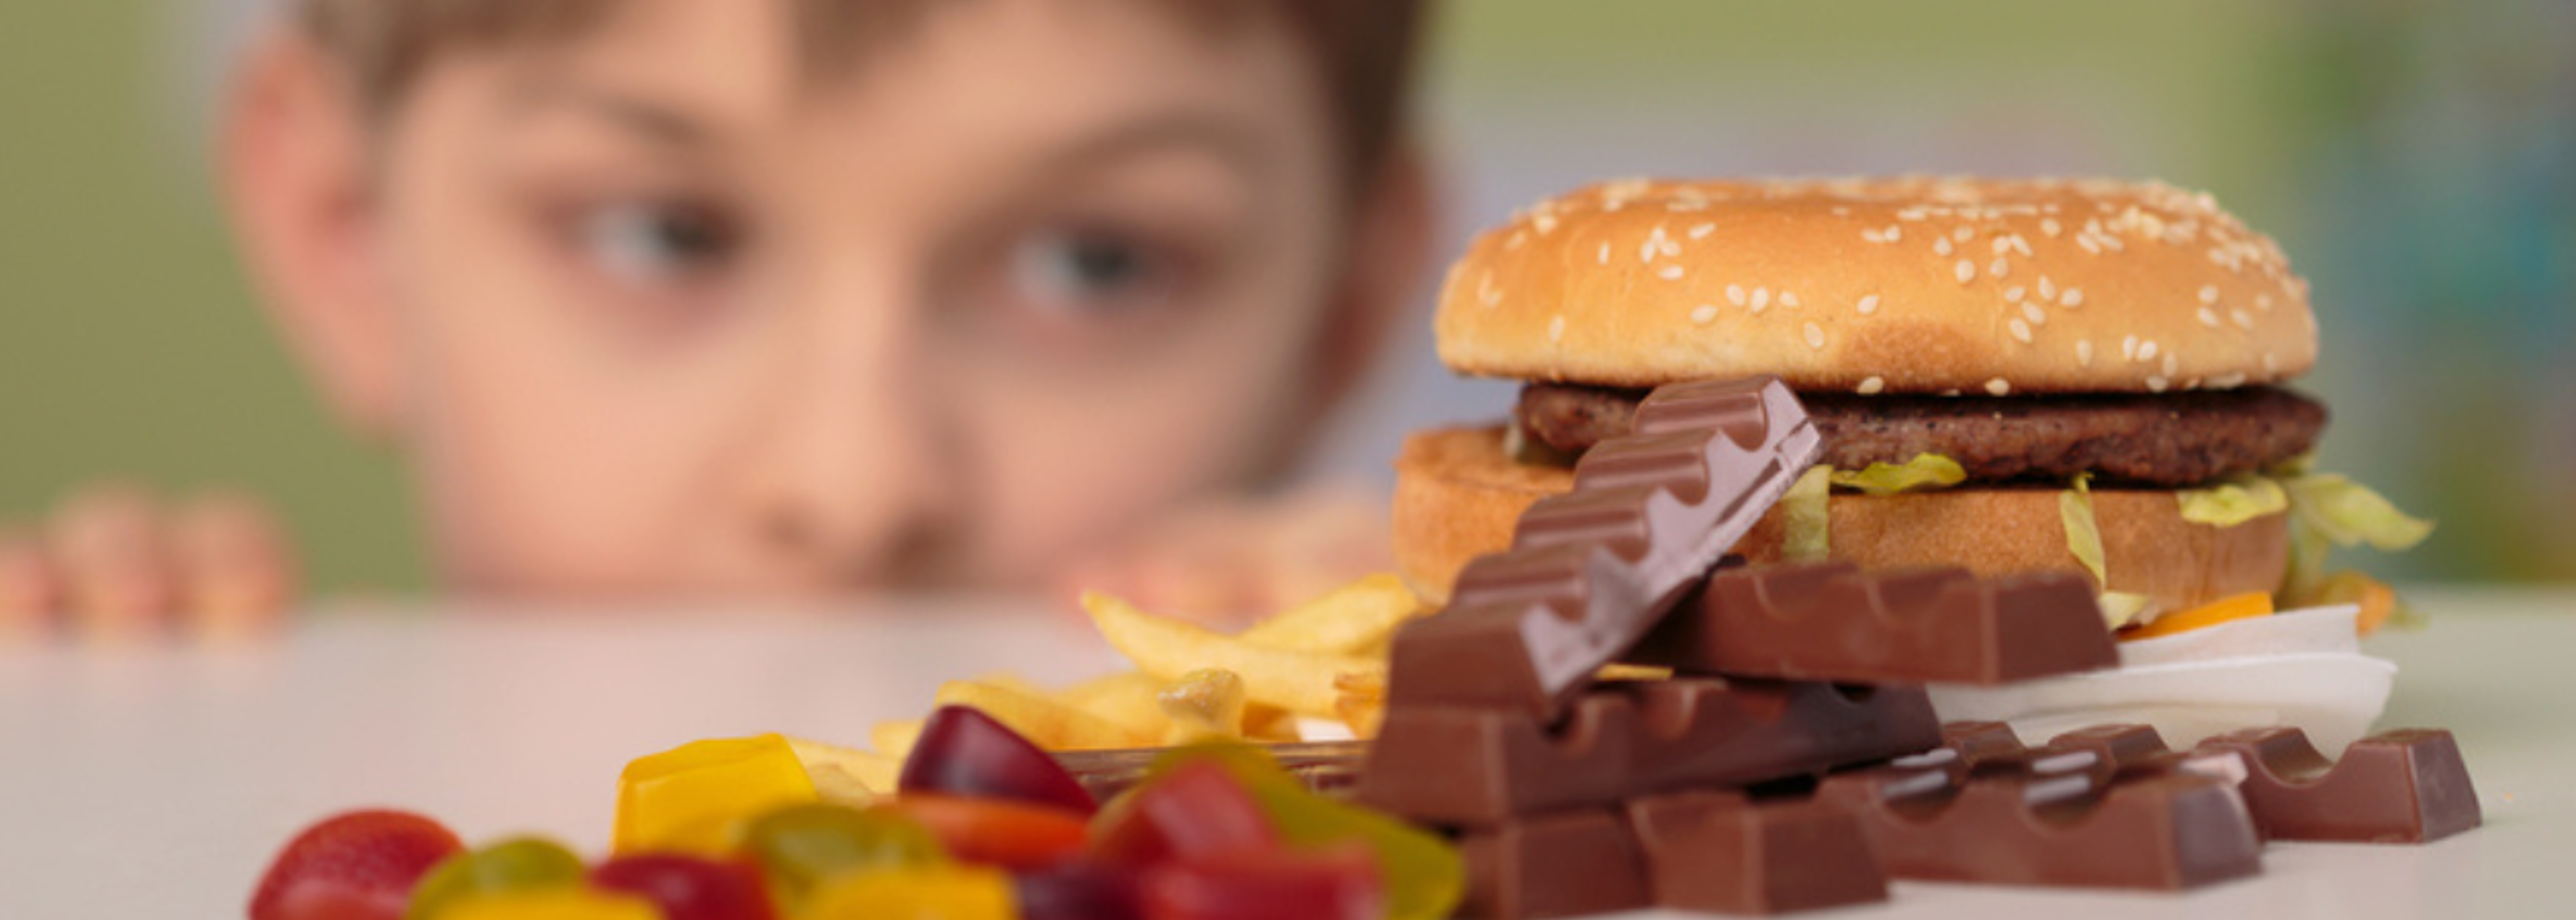 Public overwhelmingly in support of ban on junk food advertising